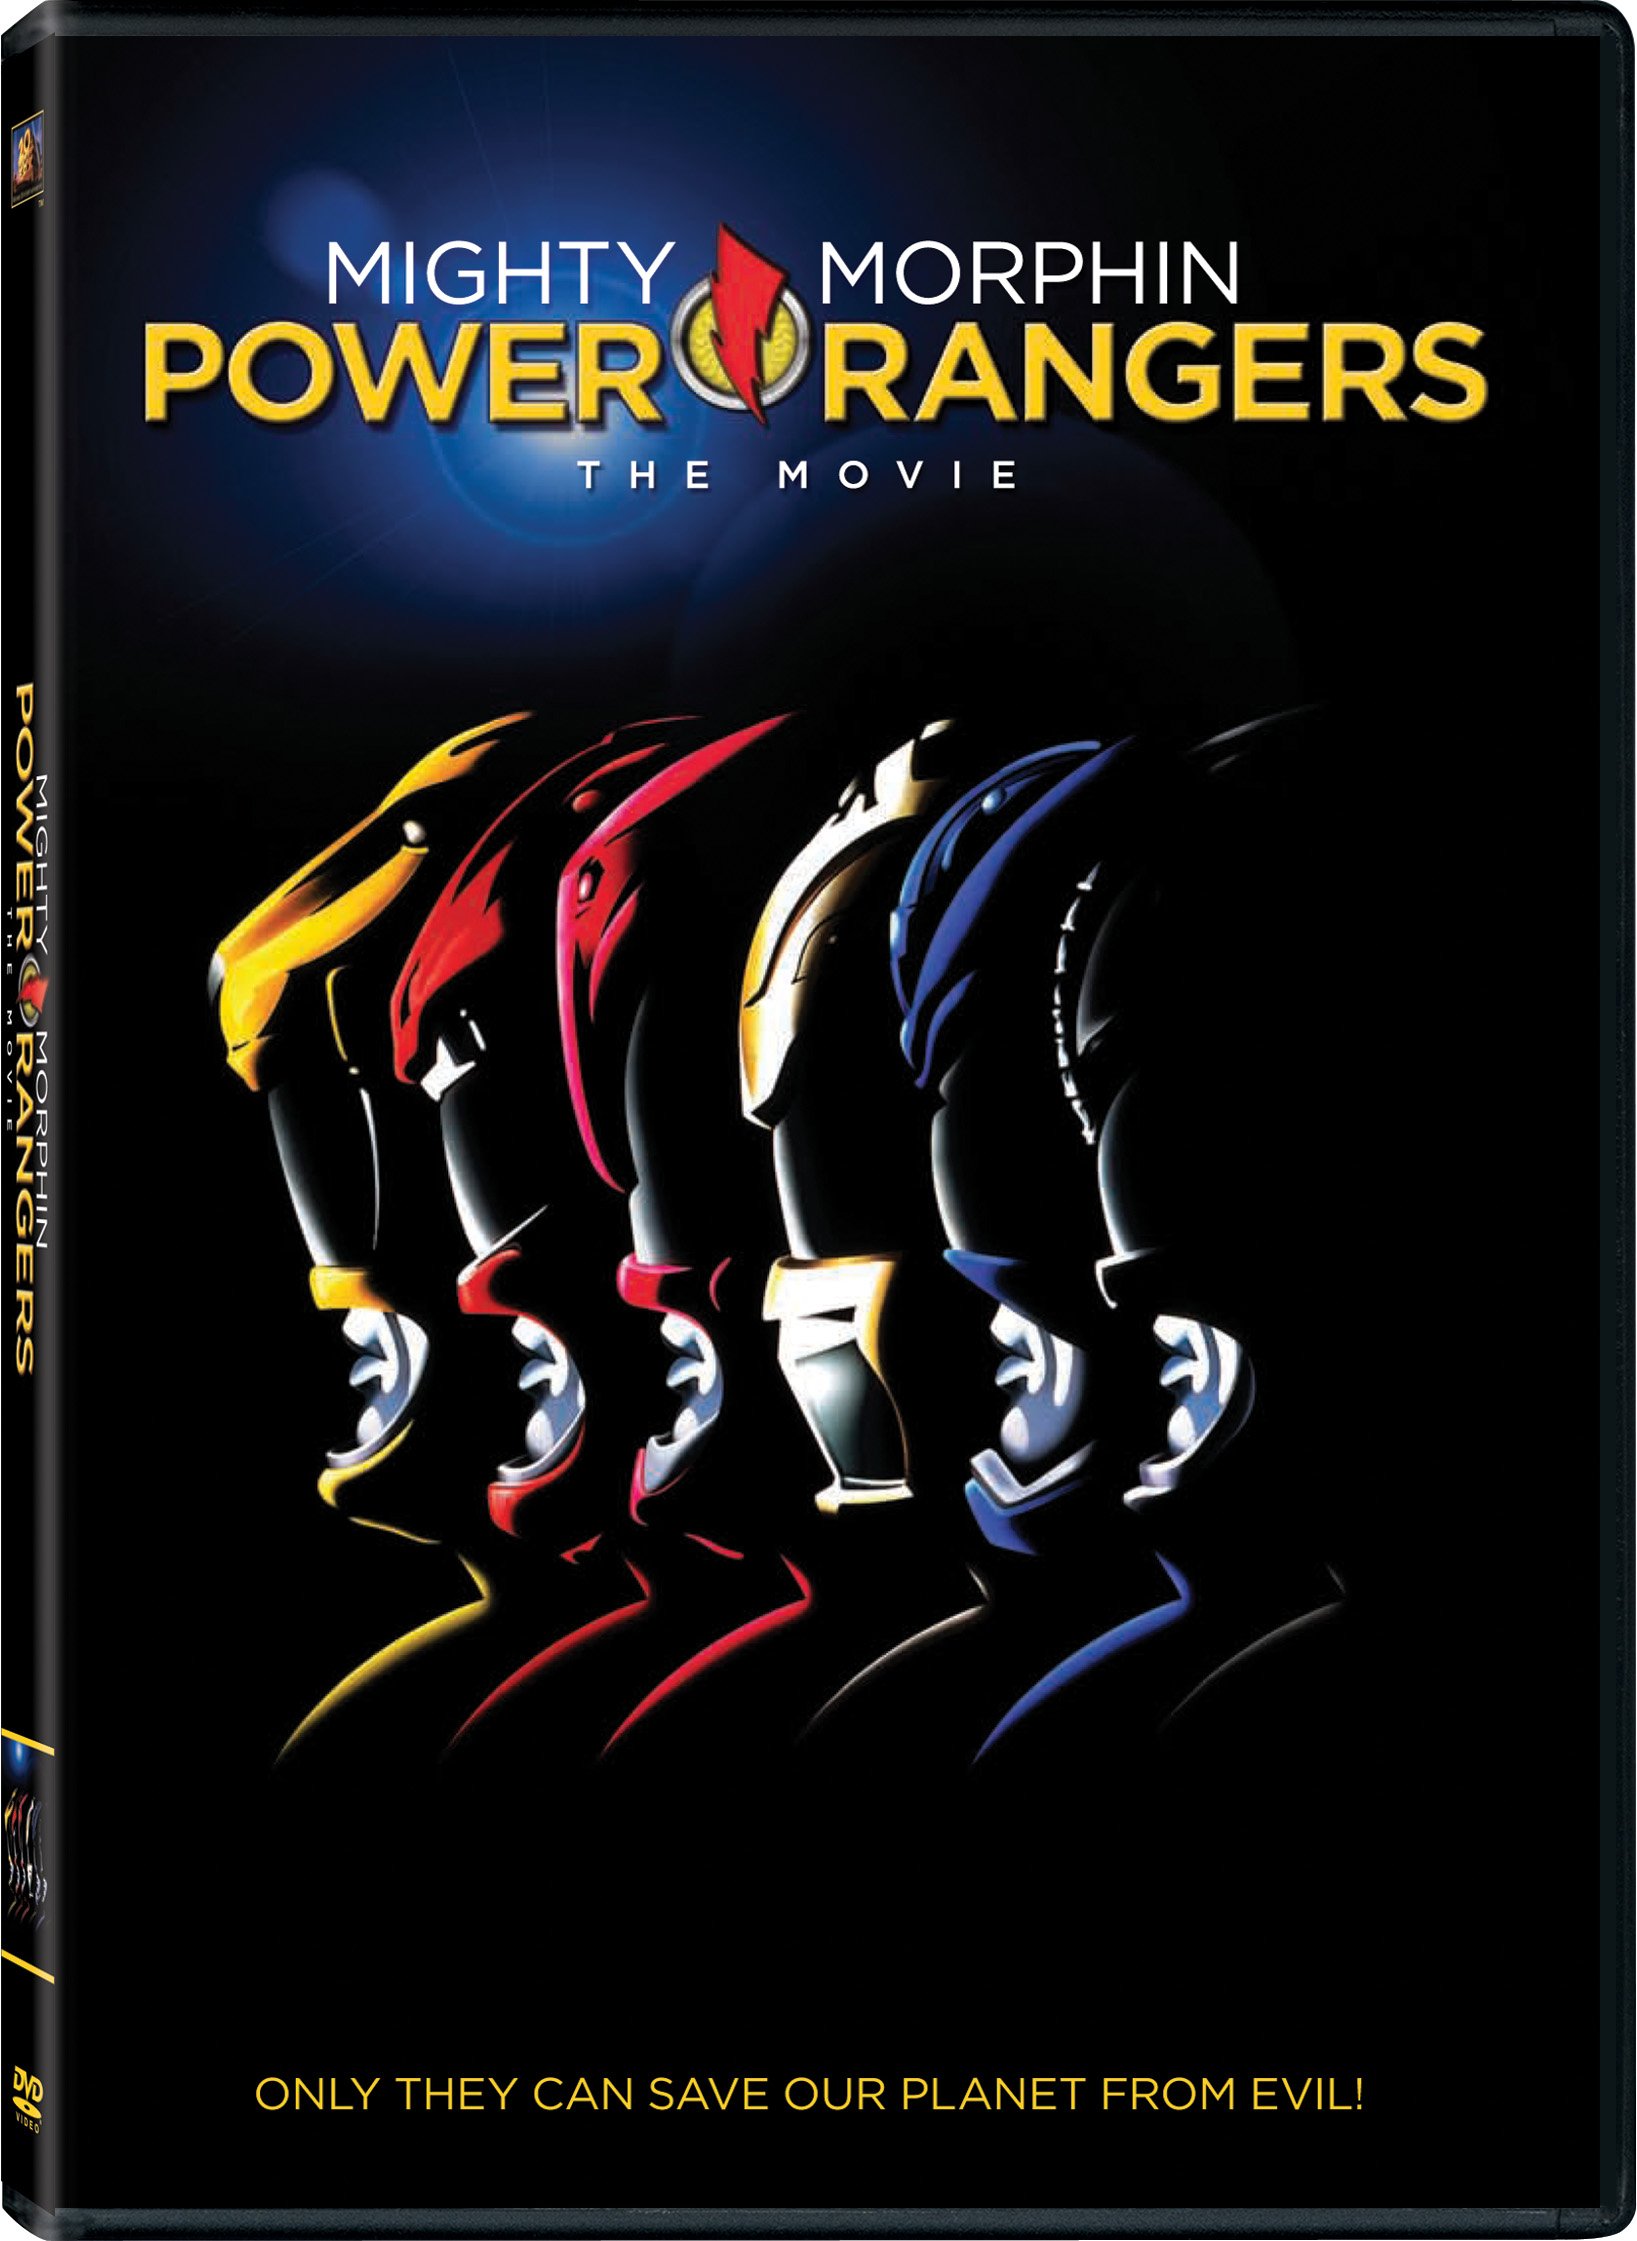 Mighty Morphin Power Rangers: The Movie DVD Release Date